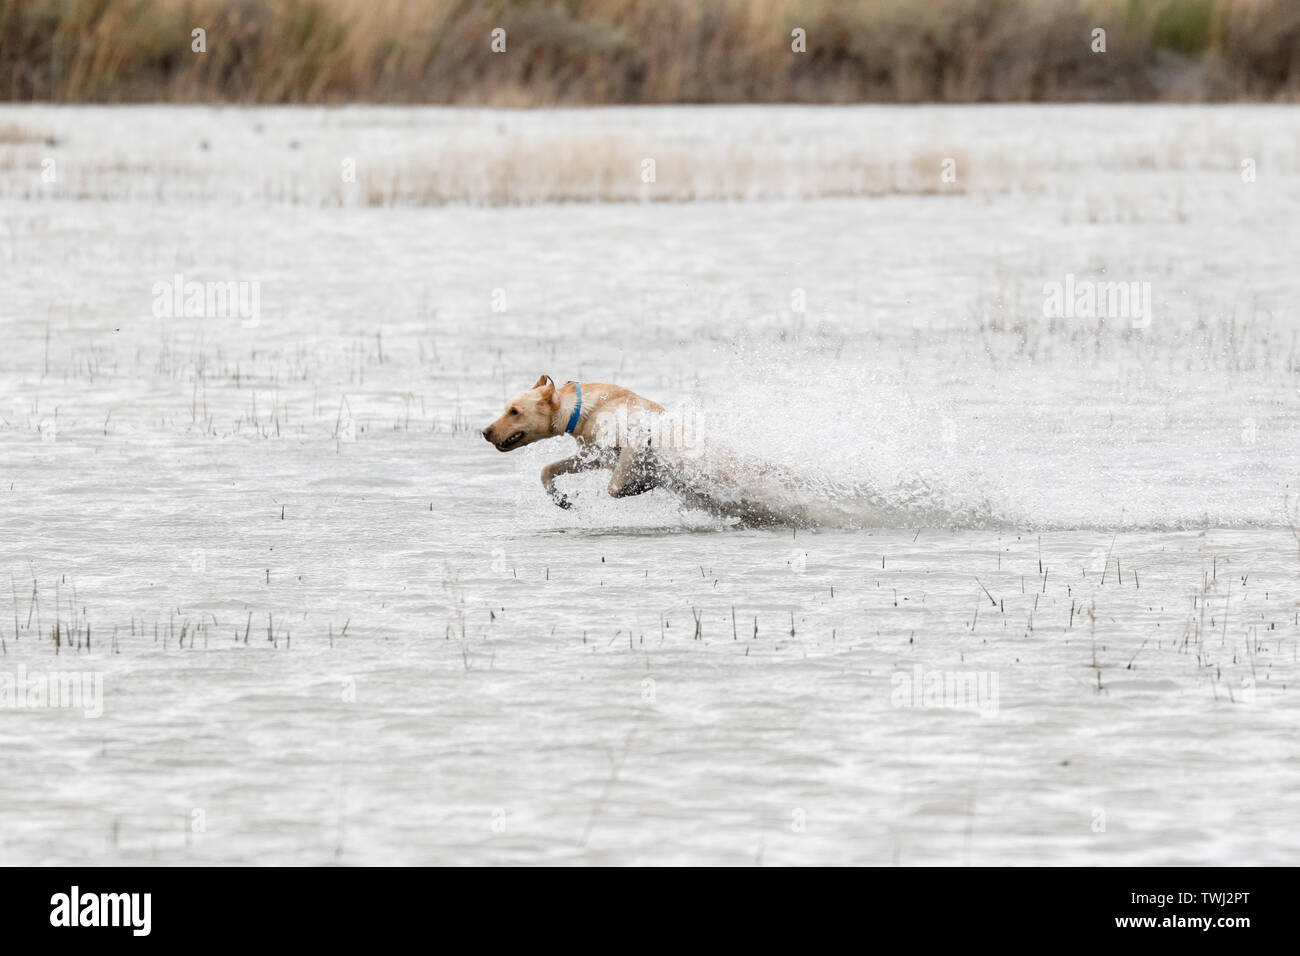 Yellow Labrador Retriever running through the water at a hunt test Stock Photo